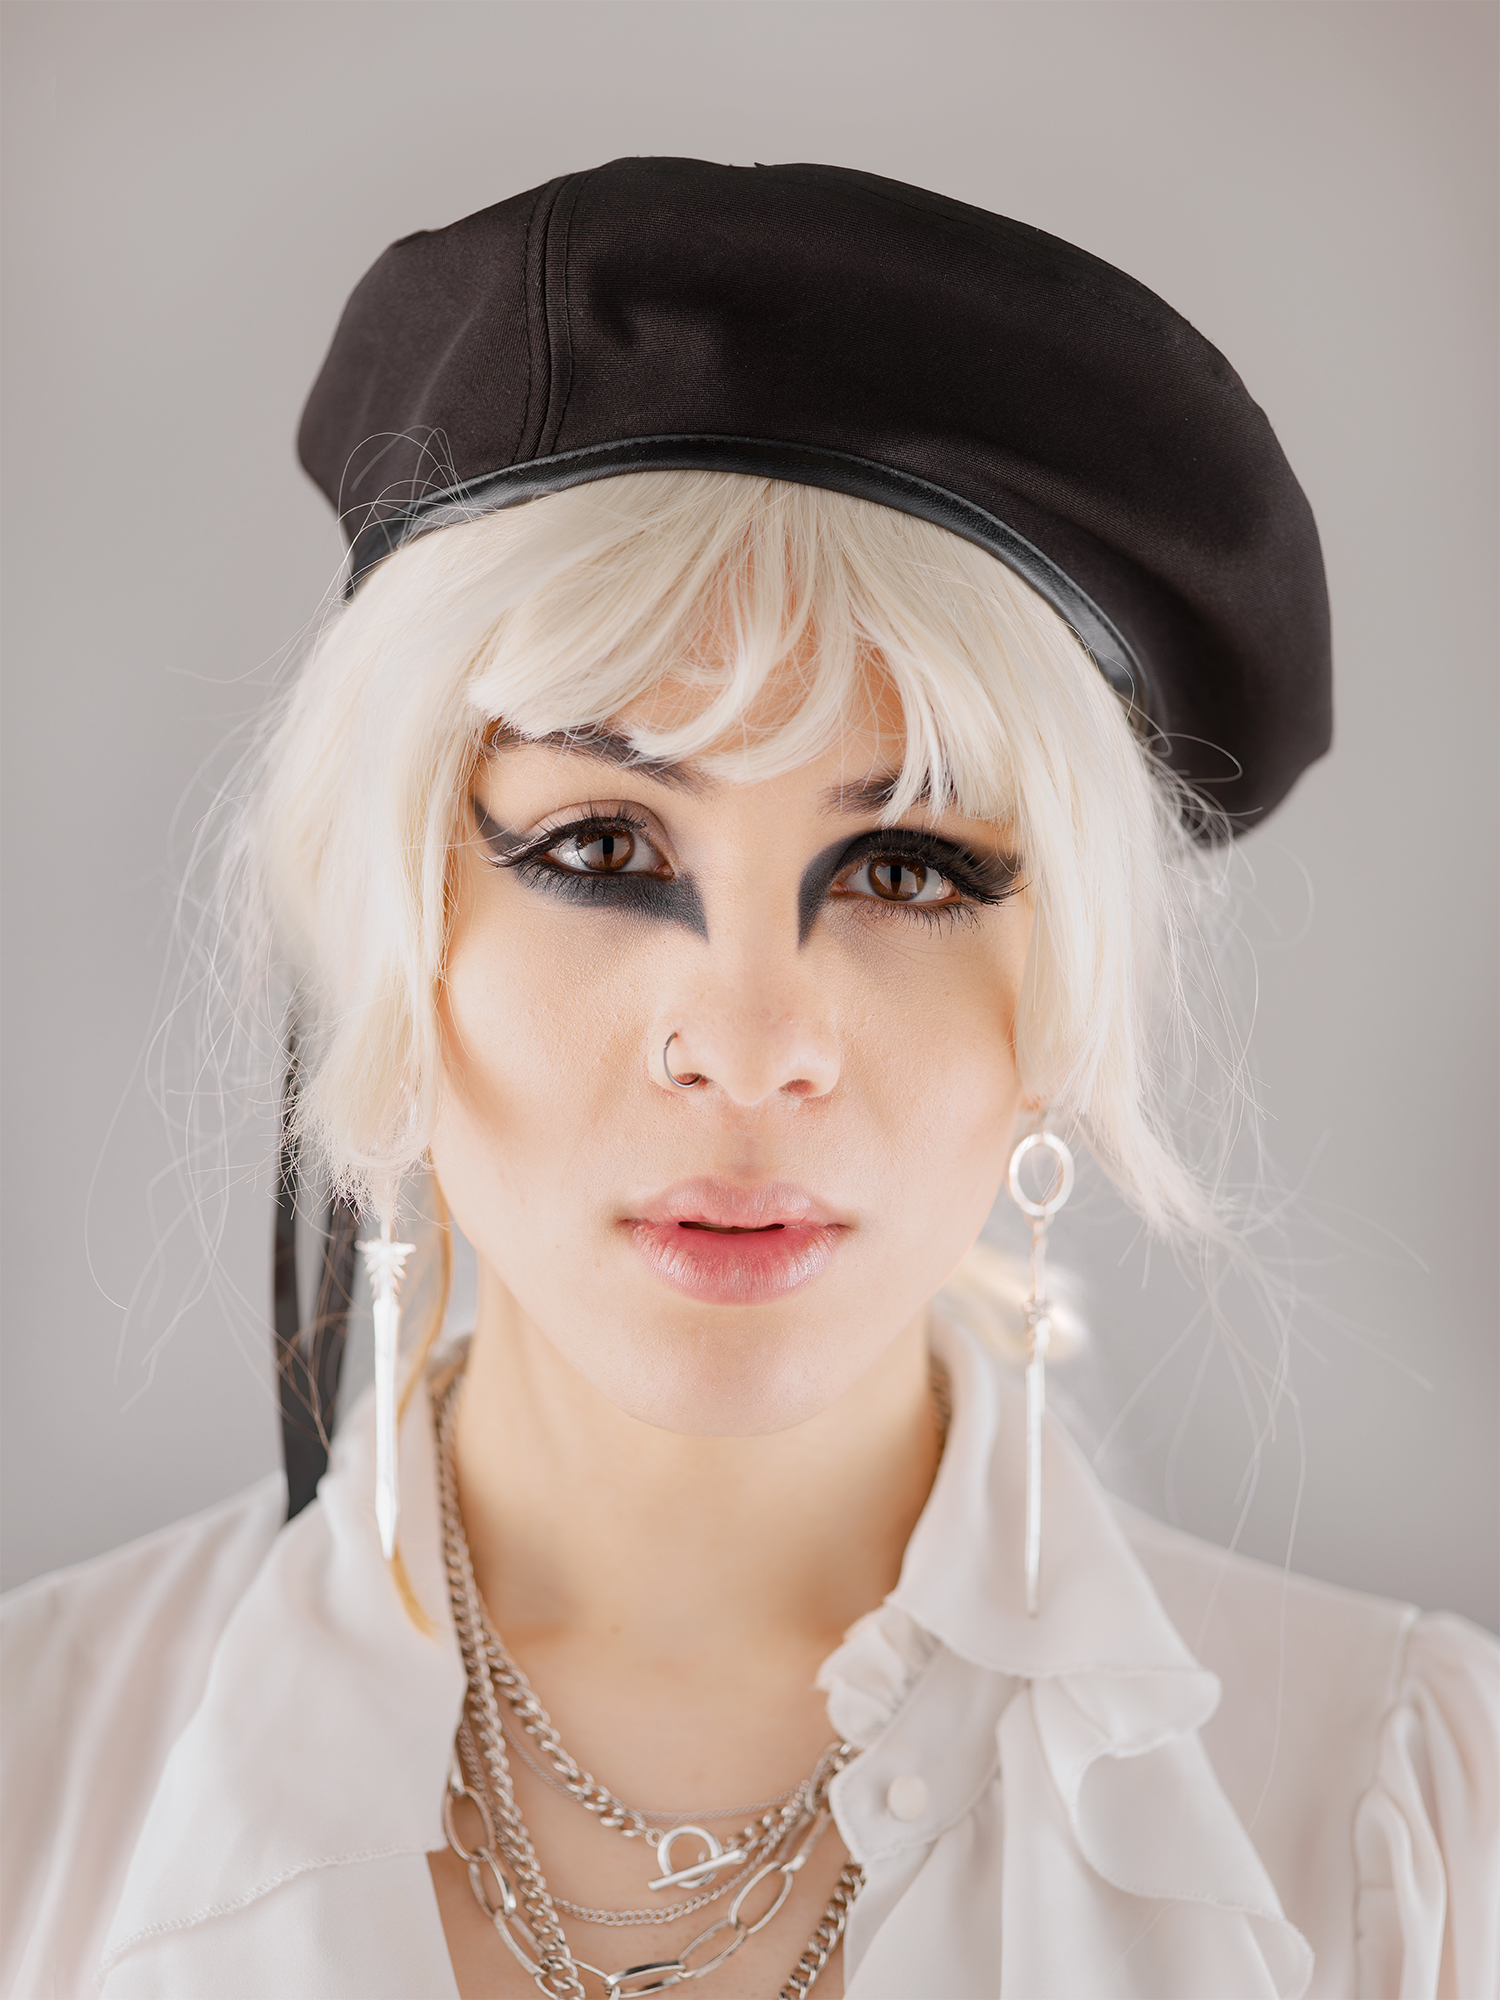 Subject is wearing a black beret, white wig and bold eyeliner, looking into the camera with a blank expression.